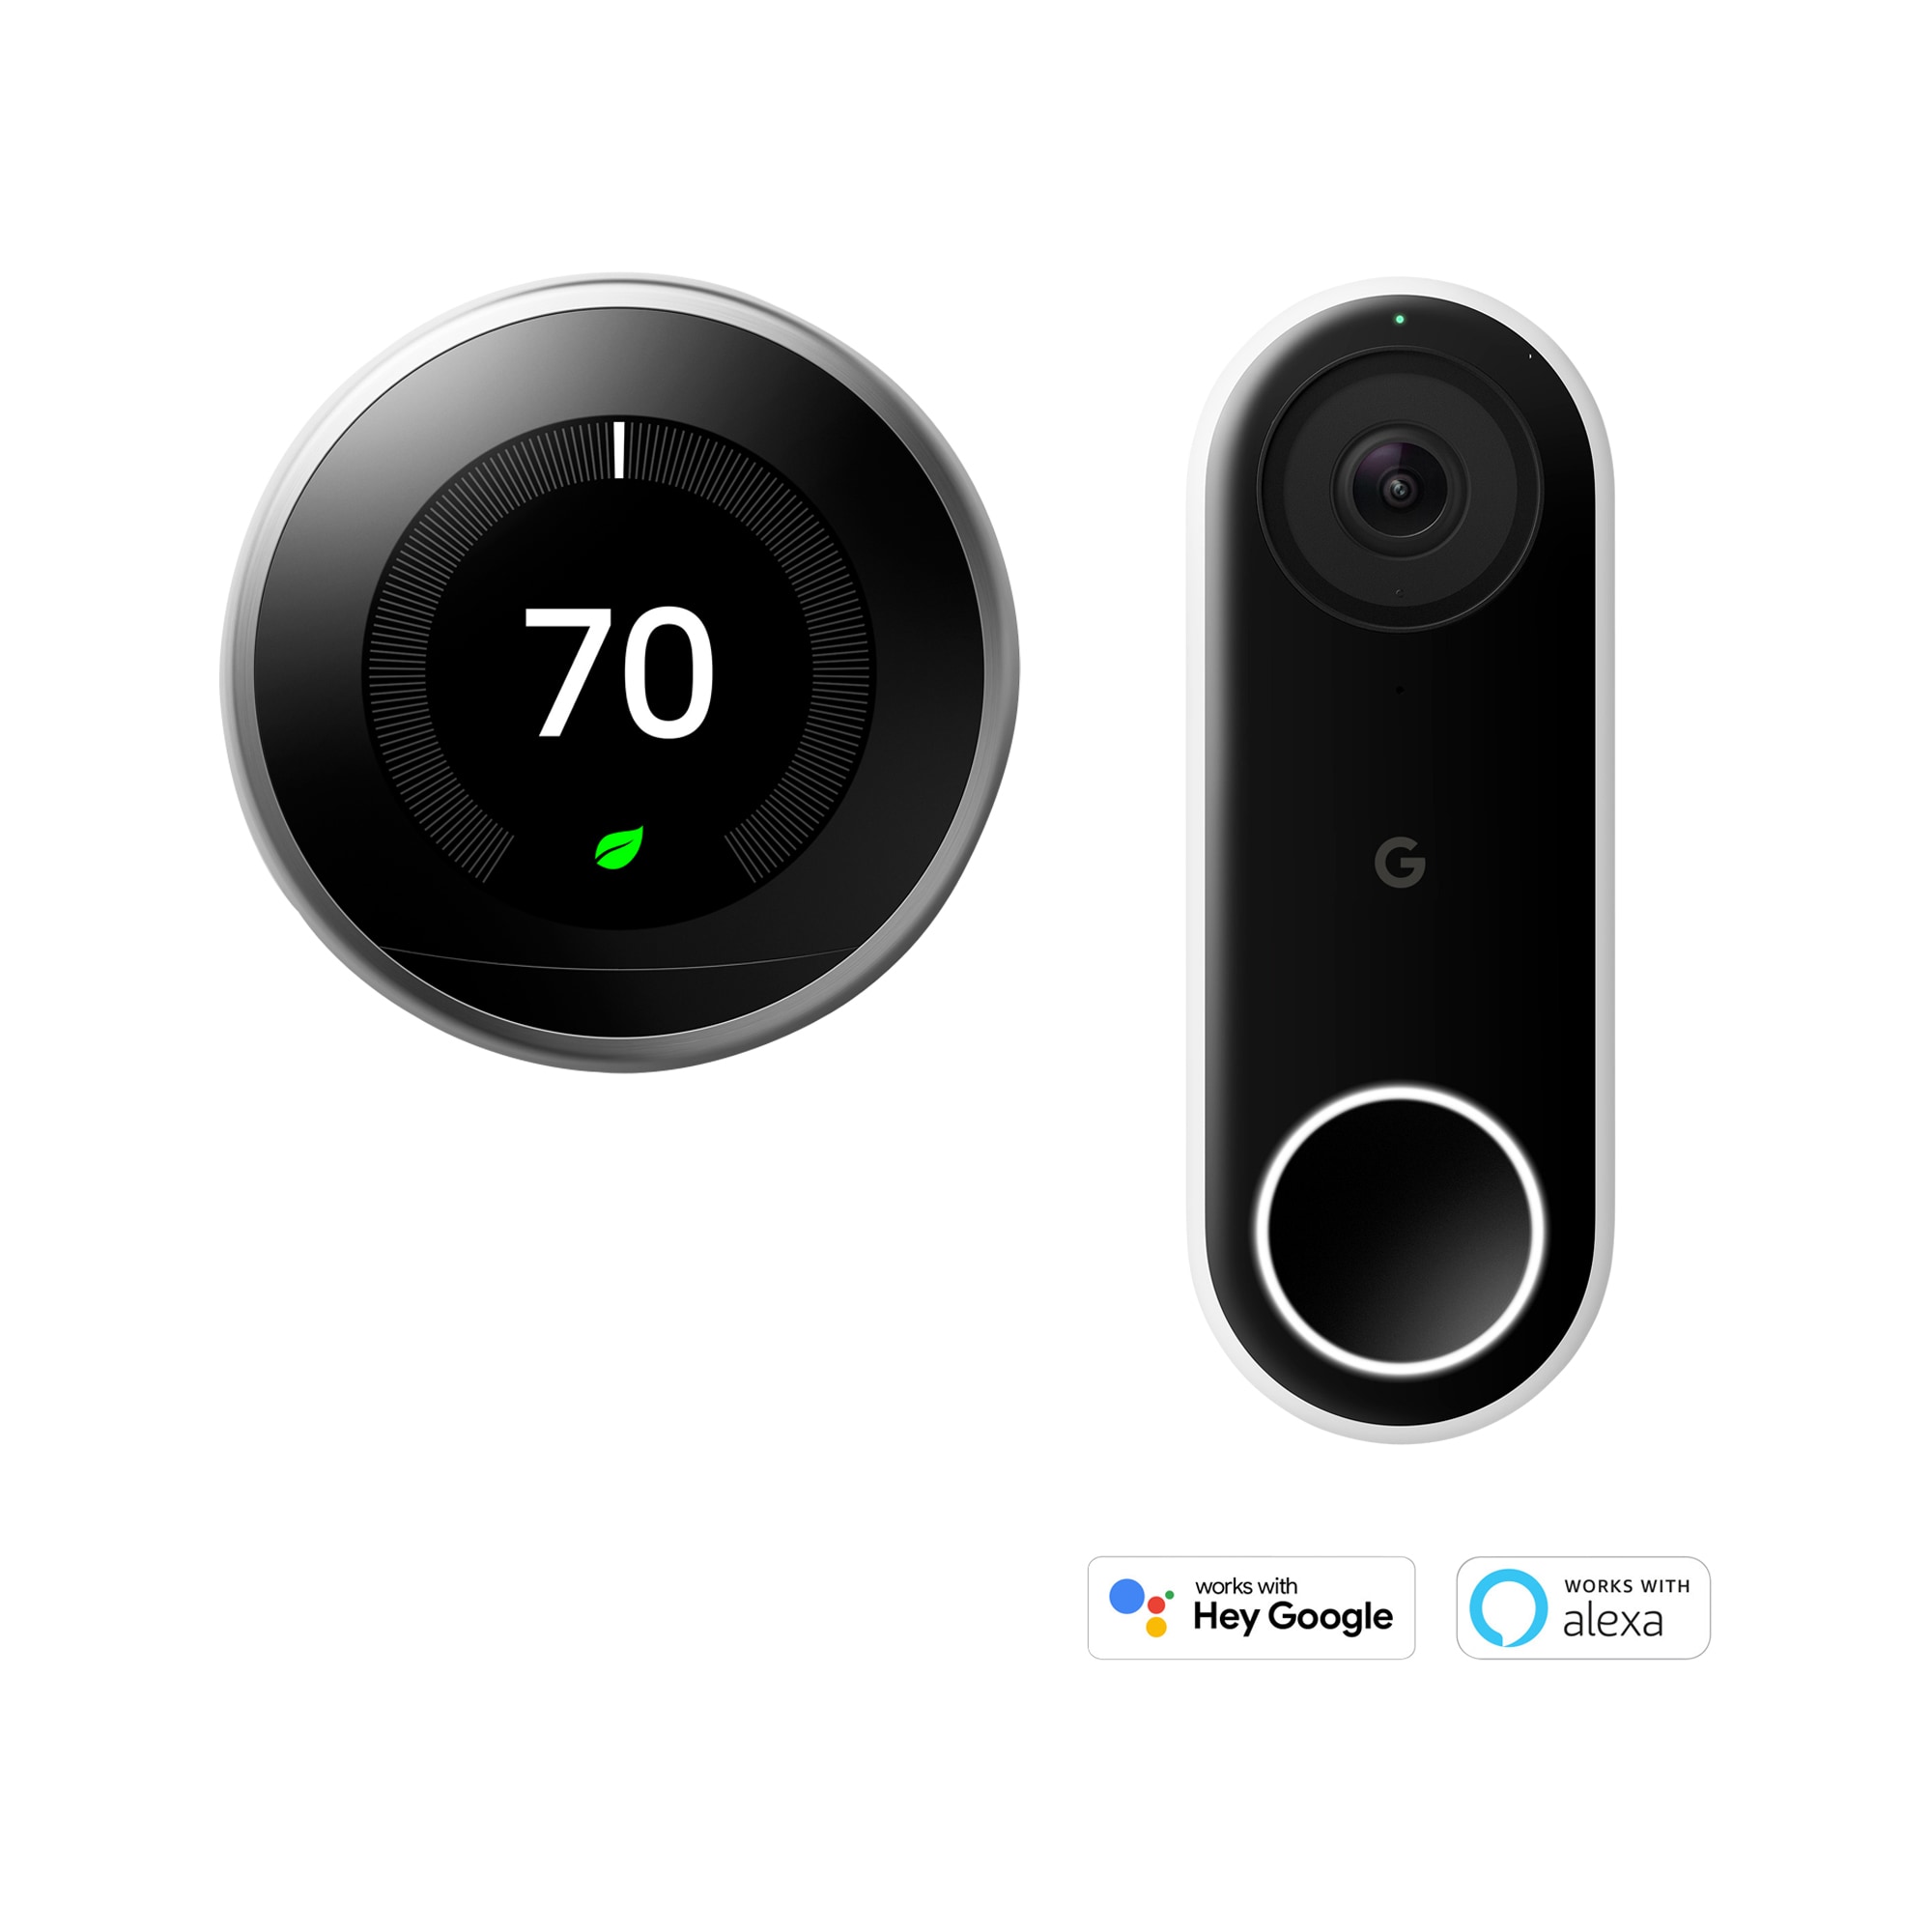 Google Google Nest Learning Thermostat 3rd Gen in Stainless Steel and Google Nest Wired Video Doorbell Bundle